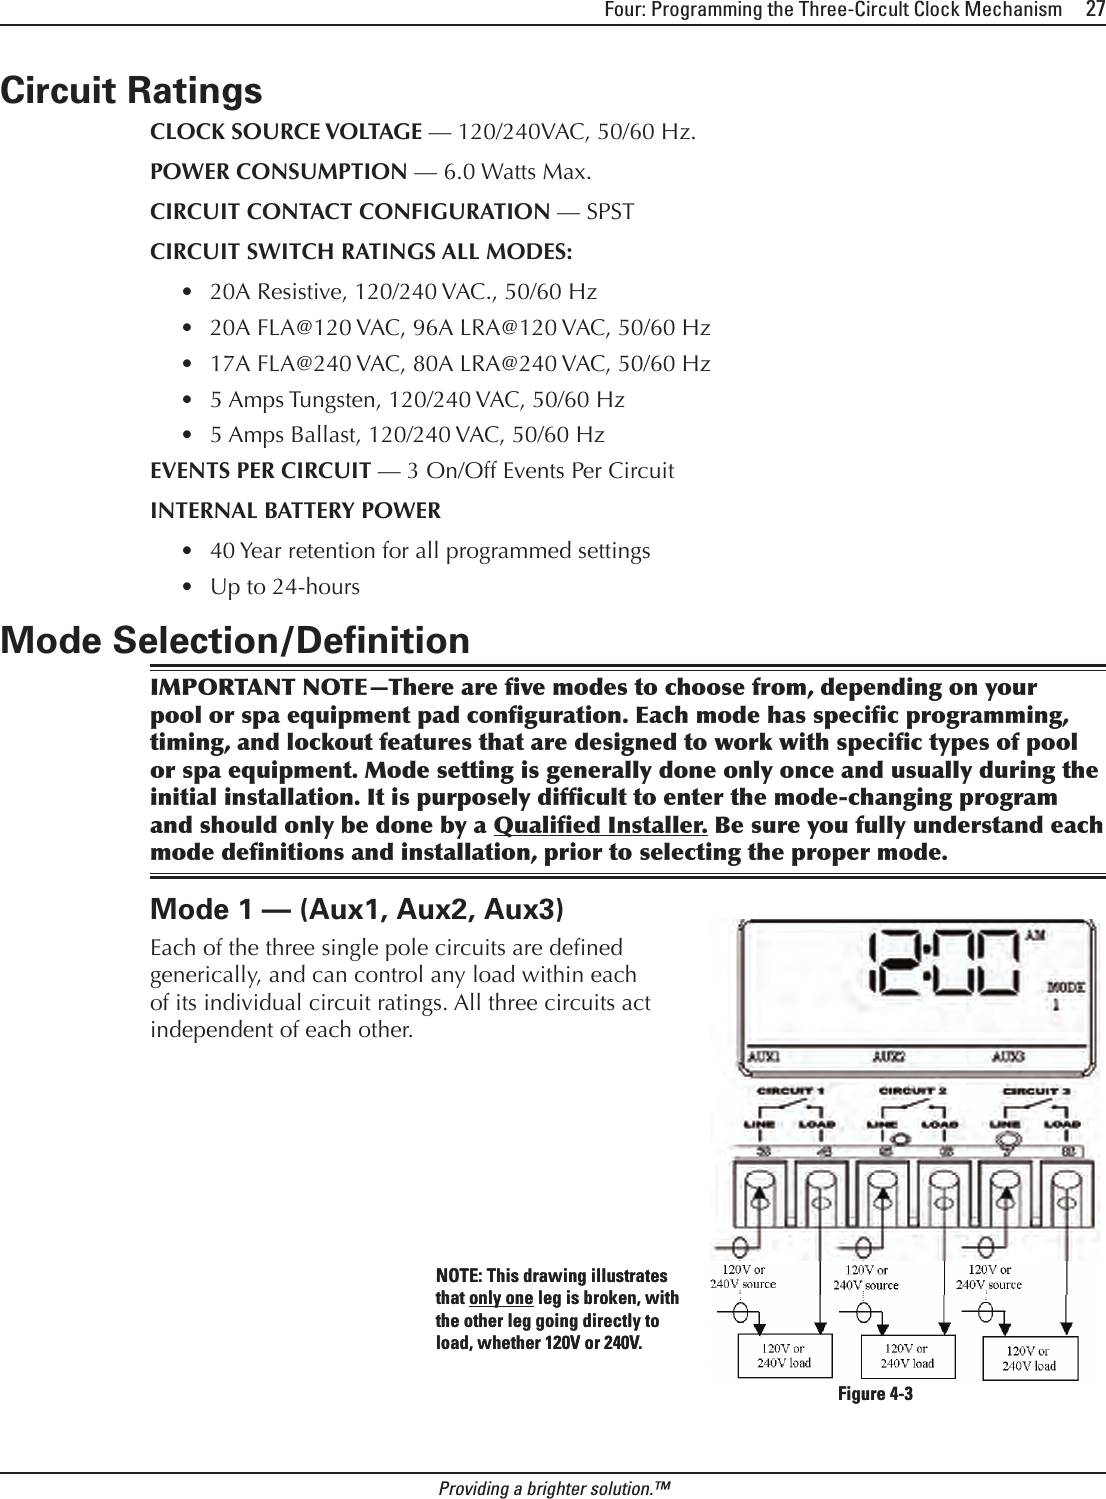 Four: Programming the Three-Circult Clock Mechanism     27Providing a brighter solution.™Circuit RatingsCLOCK SOURCE VOLTAGE — 120/240VAC, 50/60 Hz.POWER CONSUMPTION — 6.0 Watts Max.CIRCUIT CONTACT CONFIGURATION — SPSTCIRCUIT SWITCH RATINGS ALL MODES:20A Resistive, 120/240 VAC., 50/60 Hz20A FLA@120 VAC, 96A LRA@120 VAC, 50/60 Hz17A FLA@240 VAC, 80A LRA@240 VAC, 50/60 Hz5 Amps Tungsten, 120/240 VAC, 50/60 Hz5 Amps Ballast, 120/240 VAC, 50/60 HzEVENTS PER CIRCUIT — 3 On/Off Events Per CircuitINTERNAL BATTERY POWER40 Year retention for all programmed settingsUp to 24-hoursMode Selection/DeﬁnitionIMPORTANT NOTE—There are ve modes to choose from, depending on your pool or spa equipment pad conguration. Each mode has specic programming, timing, and lockout features that are designed to work with specic types of pool or spa equipment. Mode setting is generally done only once and usually during the initial installation. It is purposely difcult to enter the mode-changing program and should only be done by a Qualied Installer. Be sure you fully understand each mode denitions and installation, prior to selecting the proper mode.Mode 1 — (Aux1, Aux2, Aux3)Each of the three single pole circuits are dened generically, and can control any load within each of its individual circuit ratings. All three circuits act independent of each other.•••••••Figure 4-3Figure 4-3NOTE: This drawing illustrates that only one leg is broken, with the other leg going directly to load, whether 120V or 240V.NOTE: This drawing illustrates that only one leg is broken, with the other leg going directly to load, whether 120V or 240V.